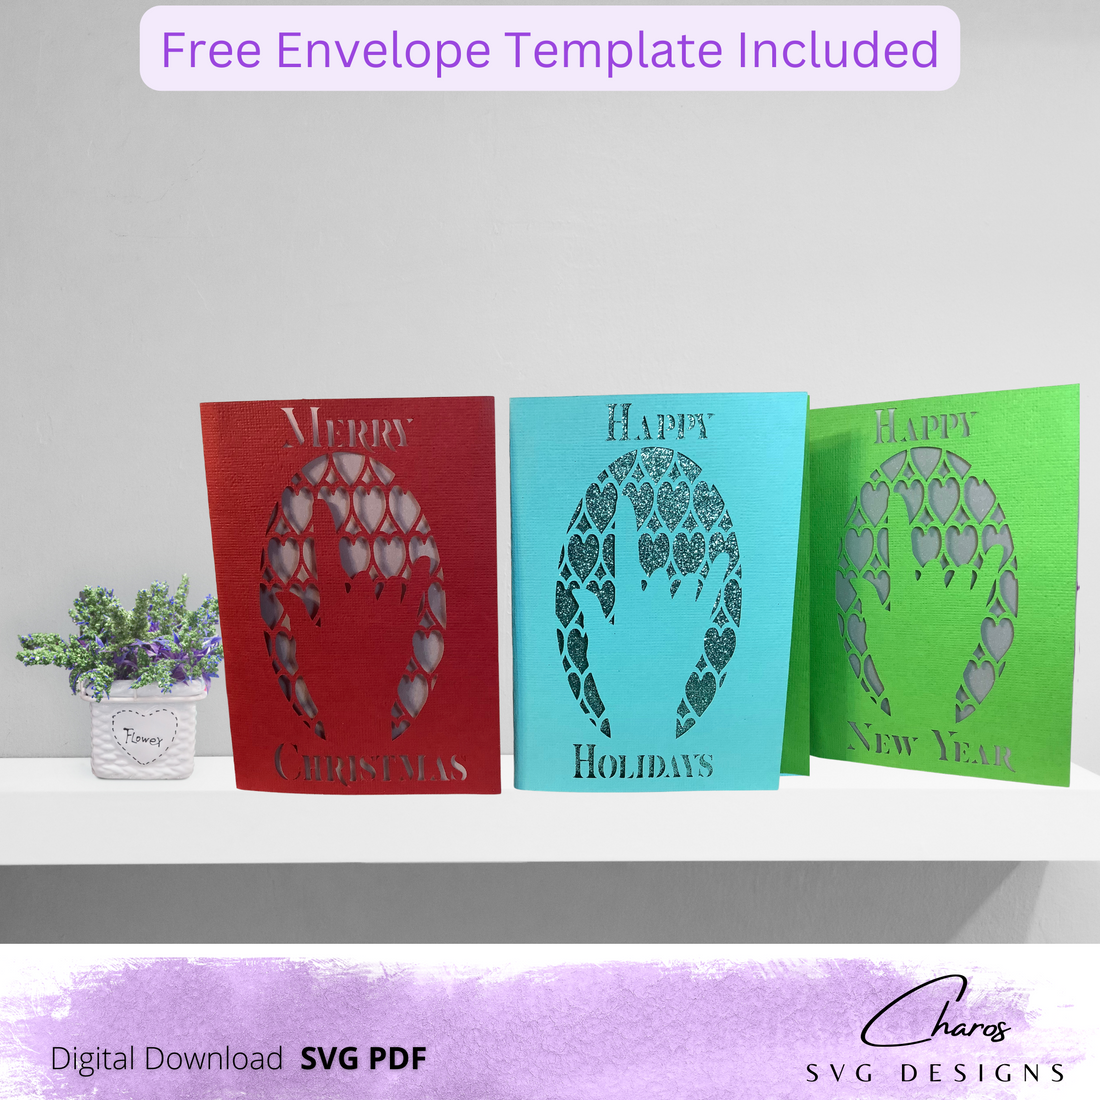 SVG: I Love You (In Sign Language)  Holiday Heart Card Bundle with Free Envelope! | Make Your Own | Card SVG | Greeting Card SVG |